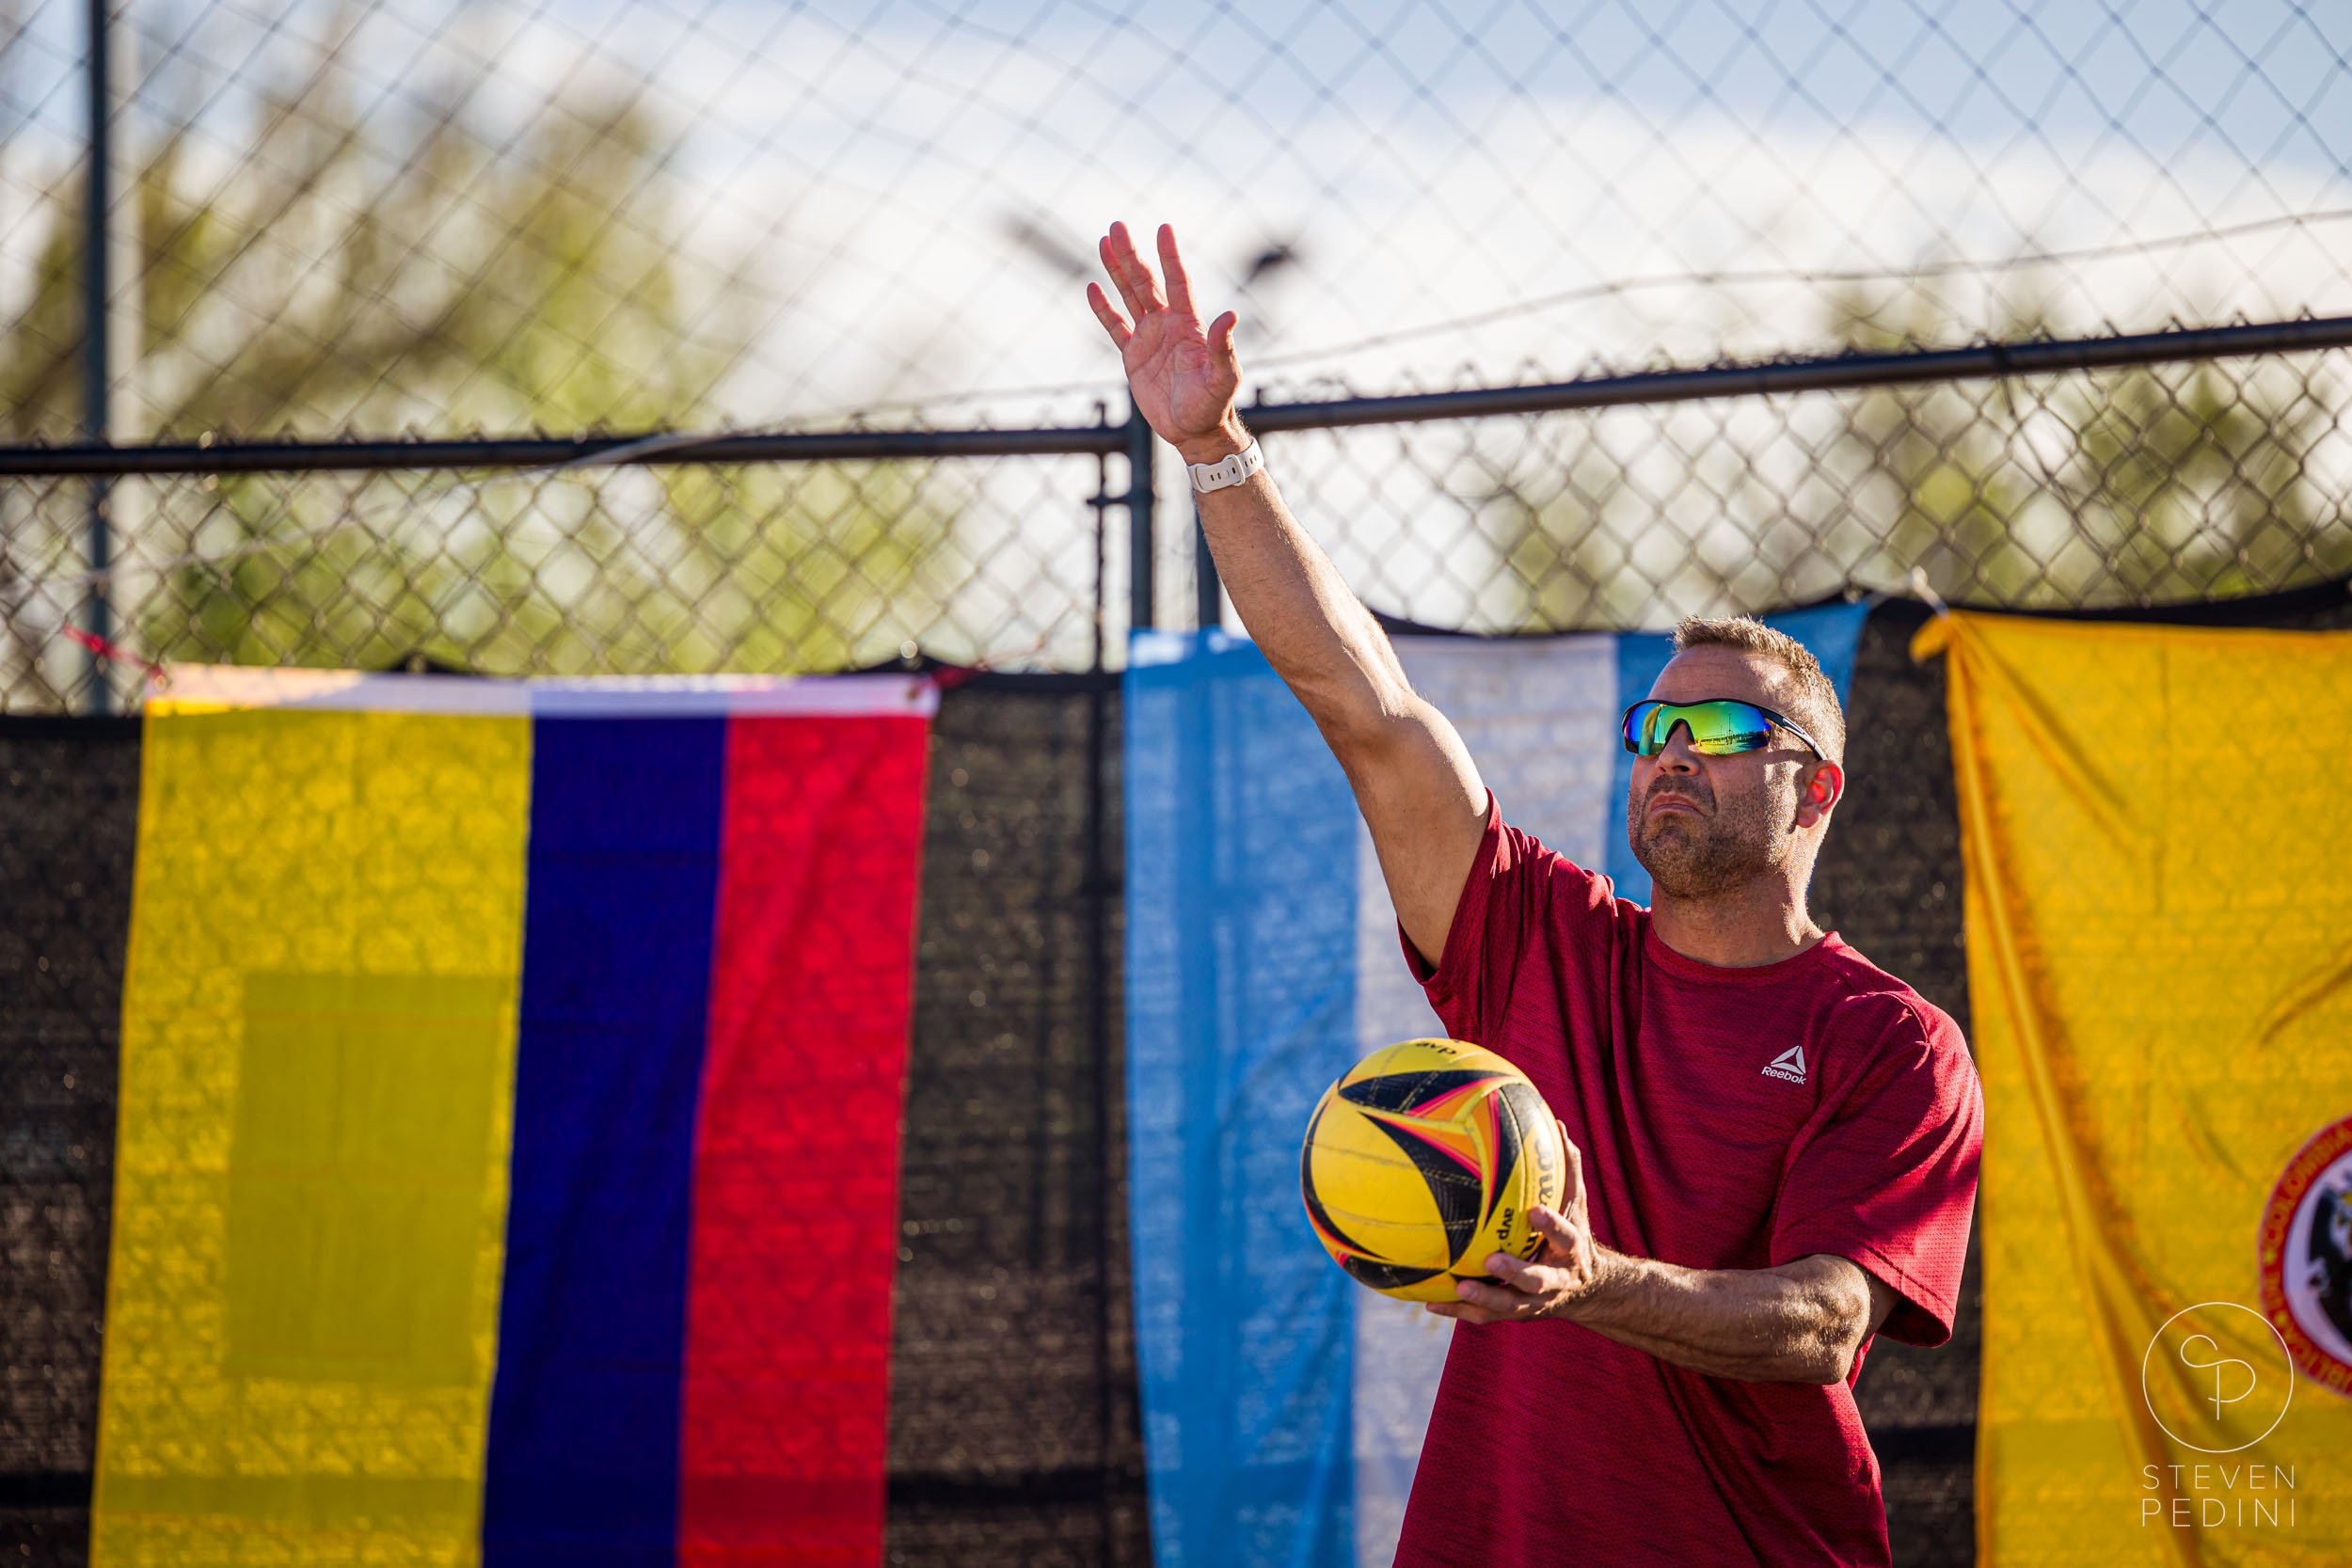 Steven Pedini Photography - Bumpy Pickle - Sand Volleyball - Houston TX - World Cup of Volleyball - 00087.jpg